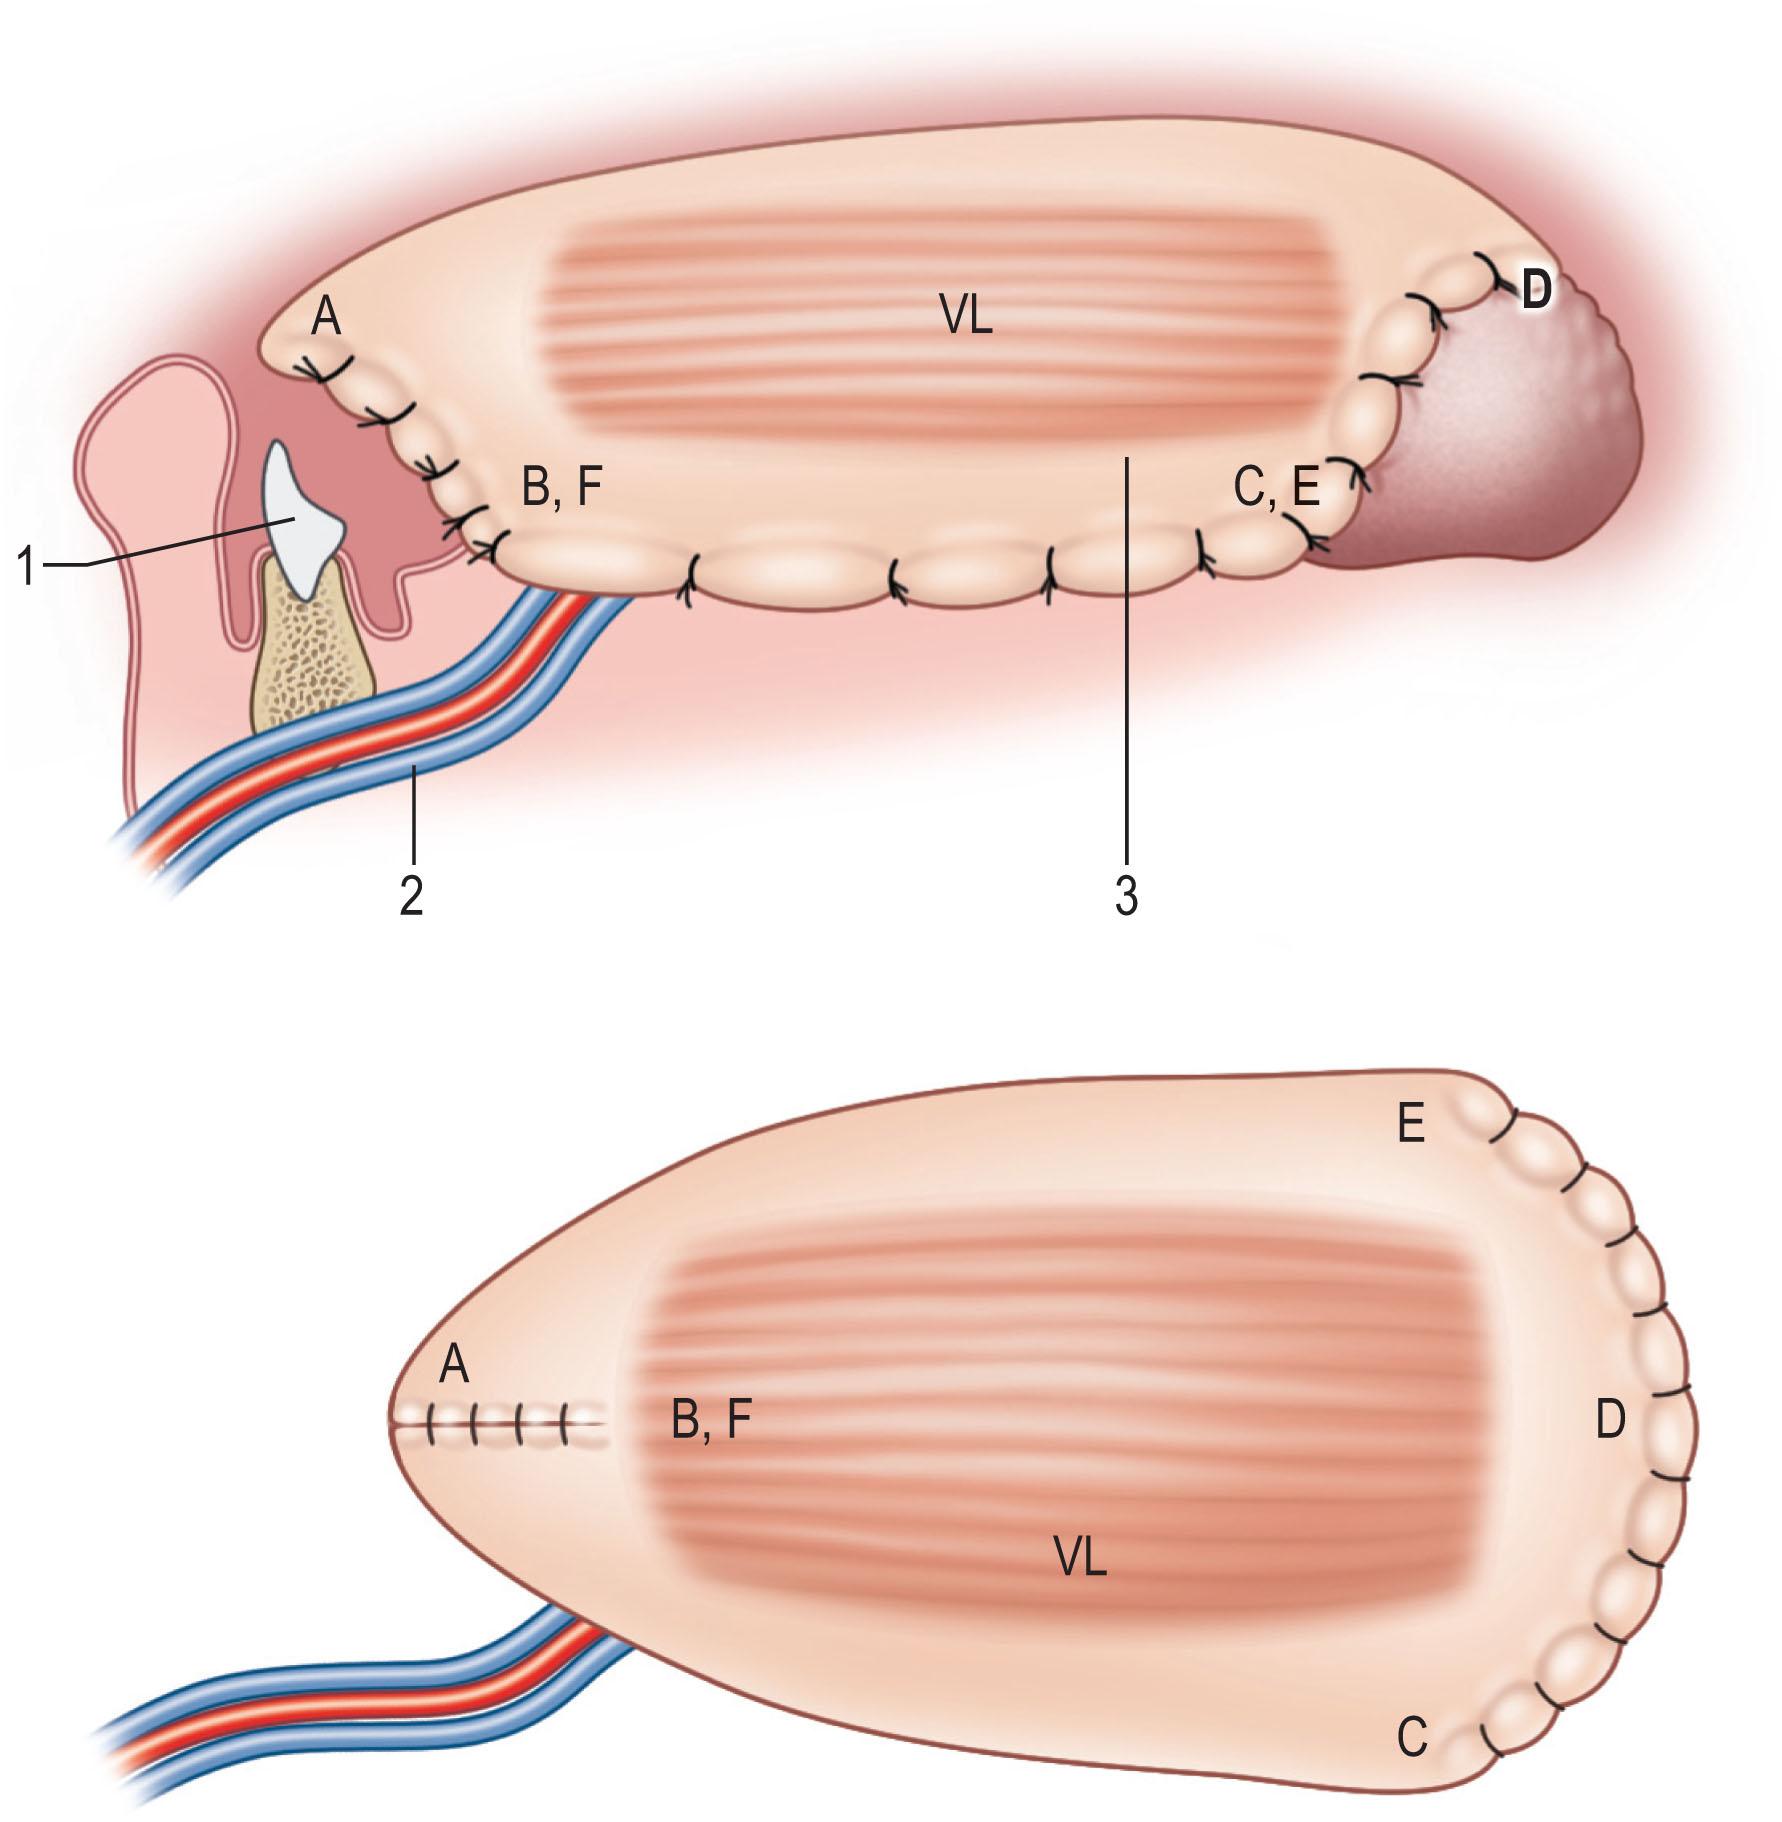 Figure 12.19, A pentagonal anterolateral thigh musculocutaneous flap sized 10 × 15 cm with a segment of vastus lateralis is used to reconstruct a total tongue defect. The distance from B to F is 10 cm and from A to D is 15 cm. The vastus lateralis is 5 × 10 cm. B and F are sutured to form the floor of the mouth, and A becomes the tip of the neotongue. The margins between B and C and E and F are repaired to the gingival mucosa of the mandible. The distance between C, D, and E forms the base of the tongue and trigone. The pedicle is placed anteriorly to reach the recipient vessels in the neck. A, tongue tip; B and F, floor of mouth; C and E, trigone; D, base of tongue; VL, vastus lateralis muscle; 1, teeth; 2, lateral circumflex femoral vessels; 3, anterolateral thigh musculocutaneous flap.